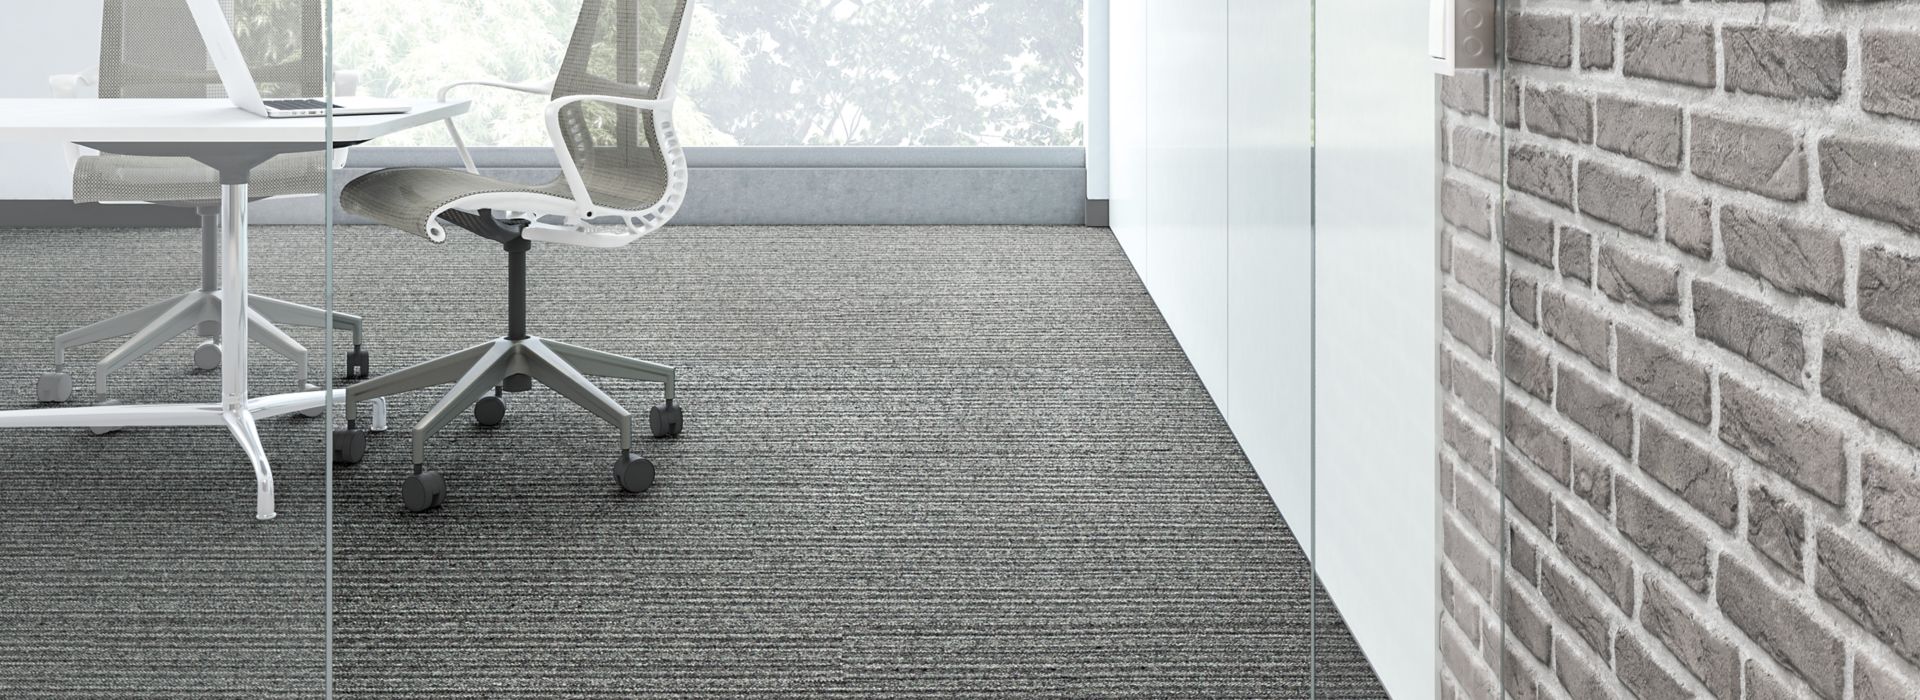 Interface WW865 plank carpet tile shown at a conference room entrance  Bildnummer 1